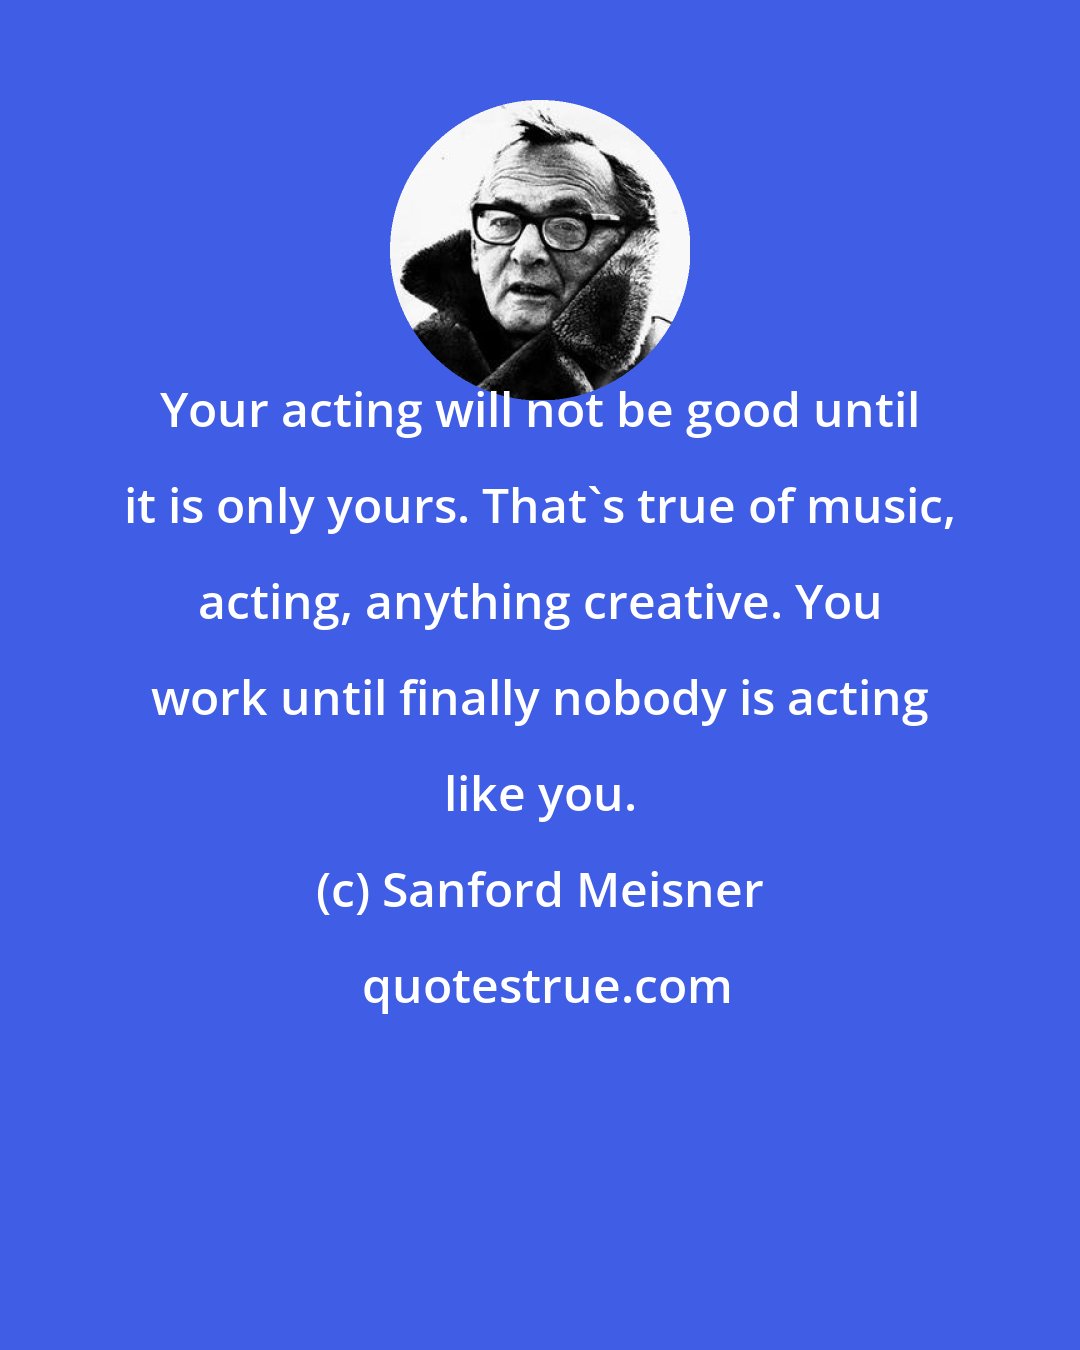 Sanford Meisner: Your acting will not be good until it is only yours. That's true of music, acting, anything creative. You work until finally nobody is acting like you.